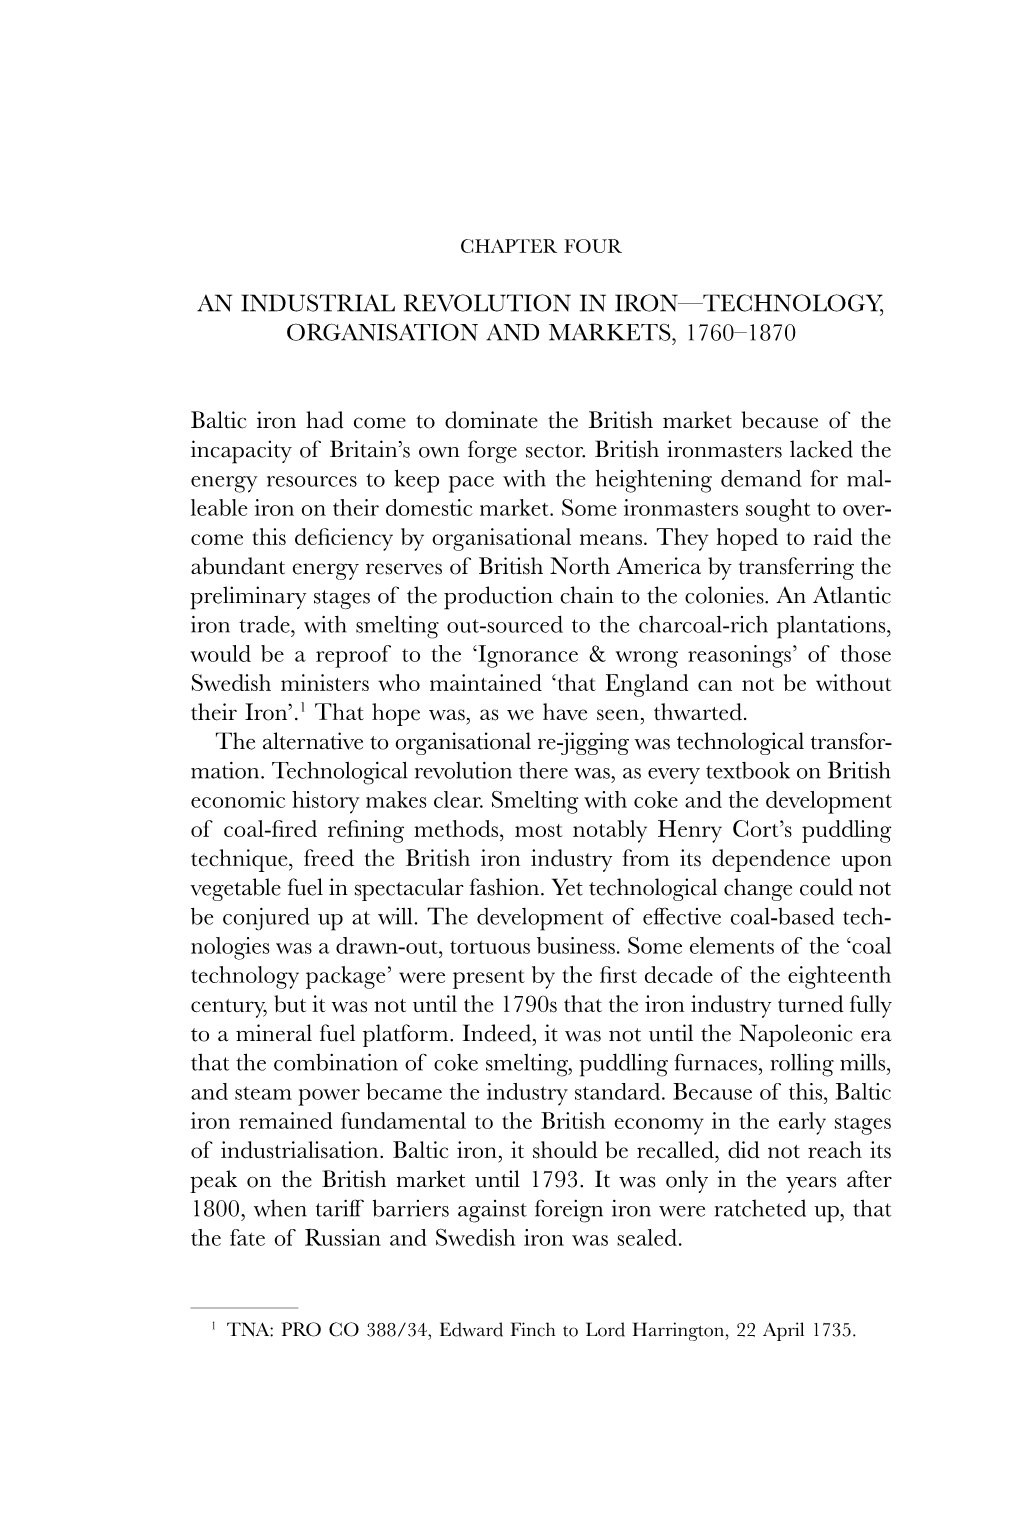 An Industrial Revolution in Iron—Technology, Organisation and Markets, 1760–1870